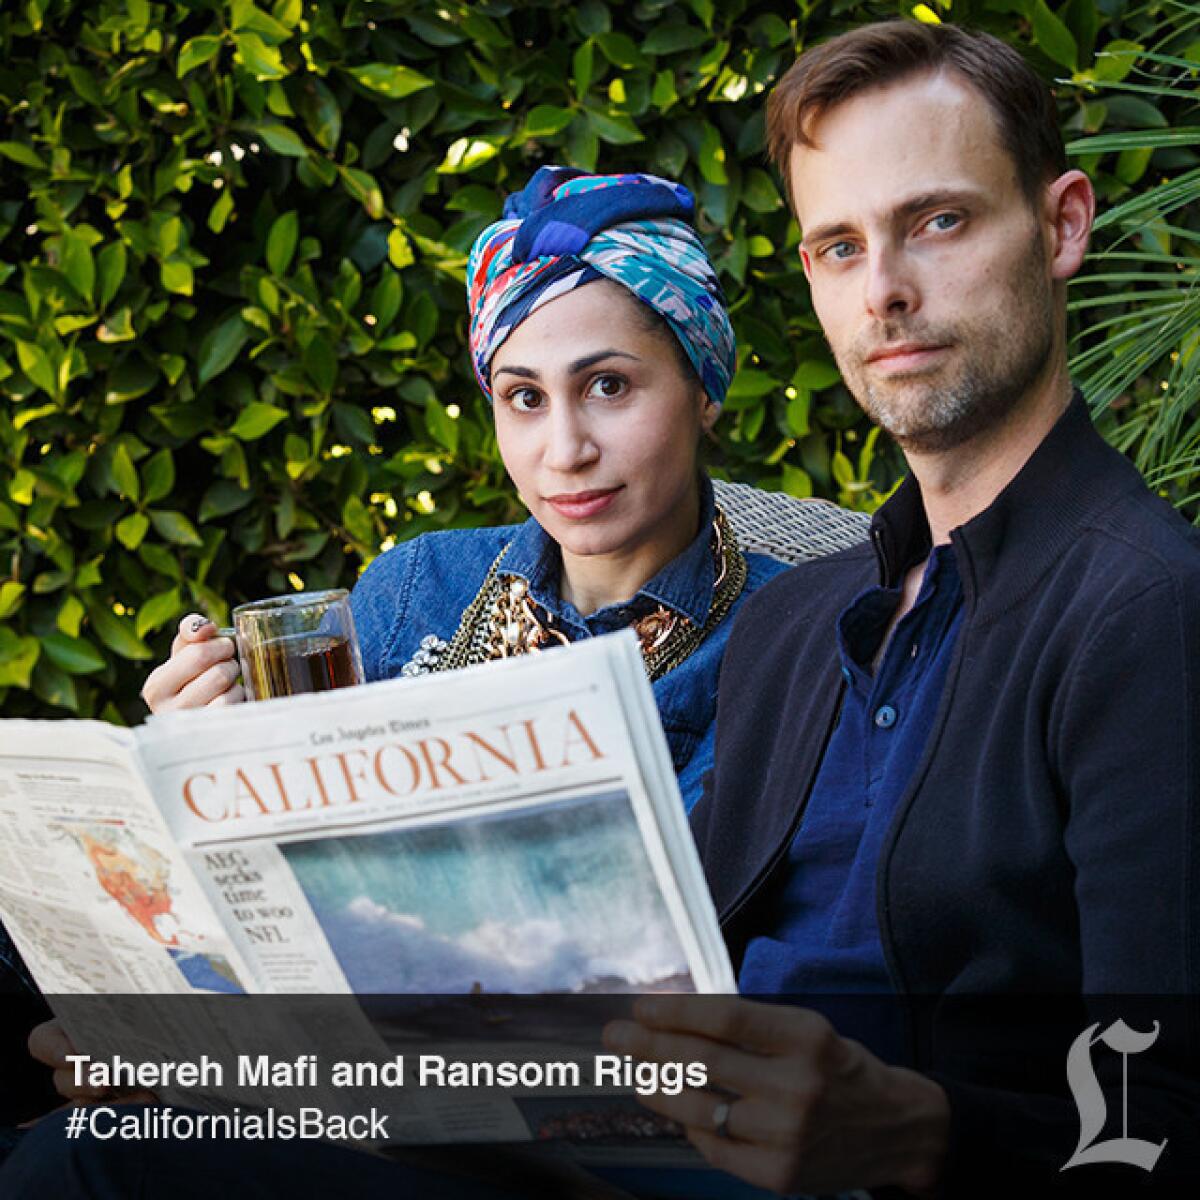 Tahereh Mafi and Ransom Riggs, Authors.